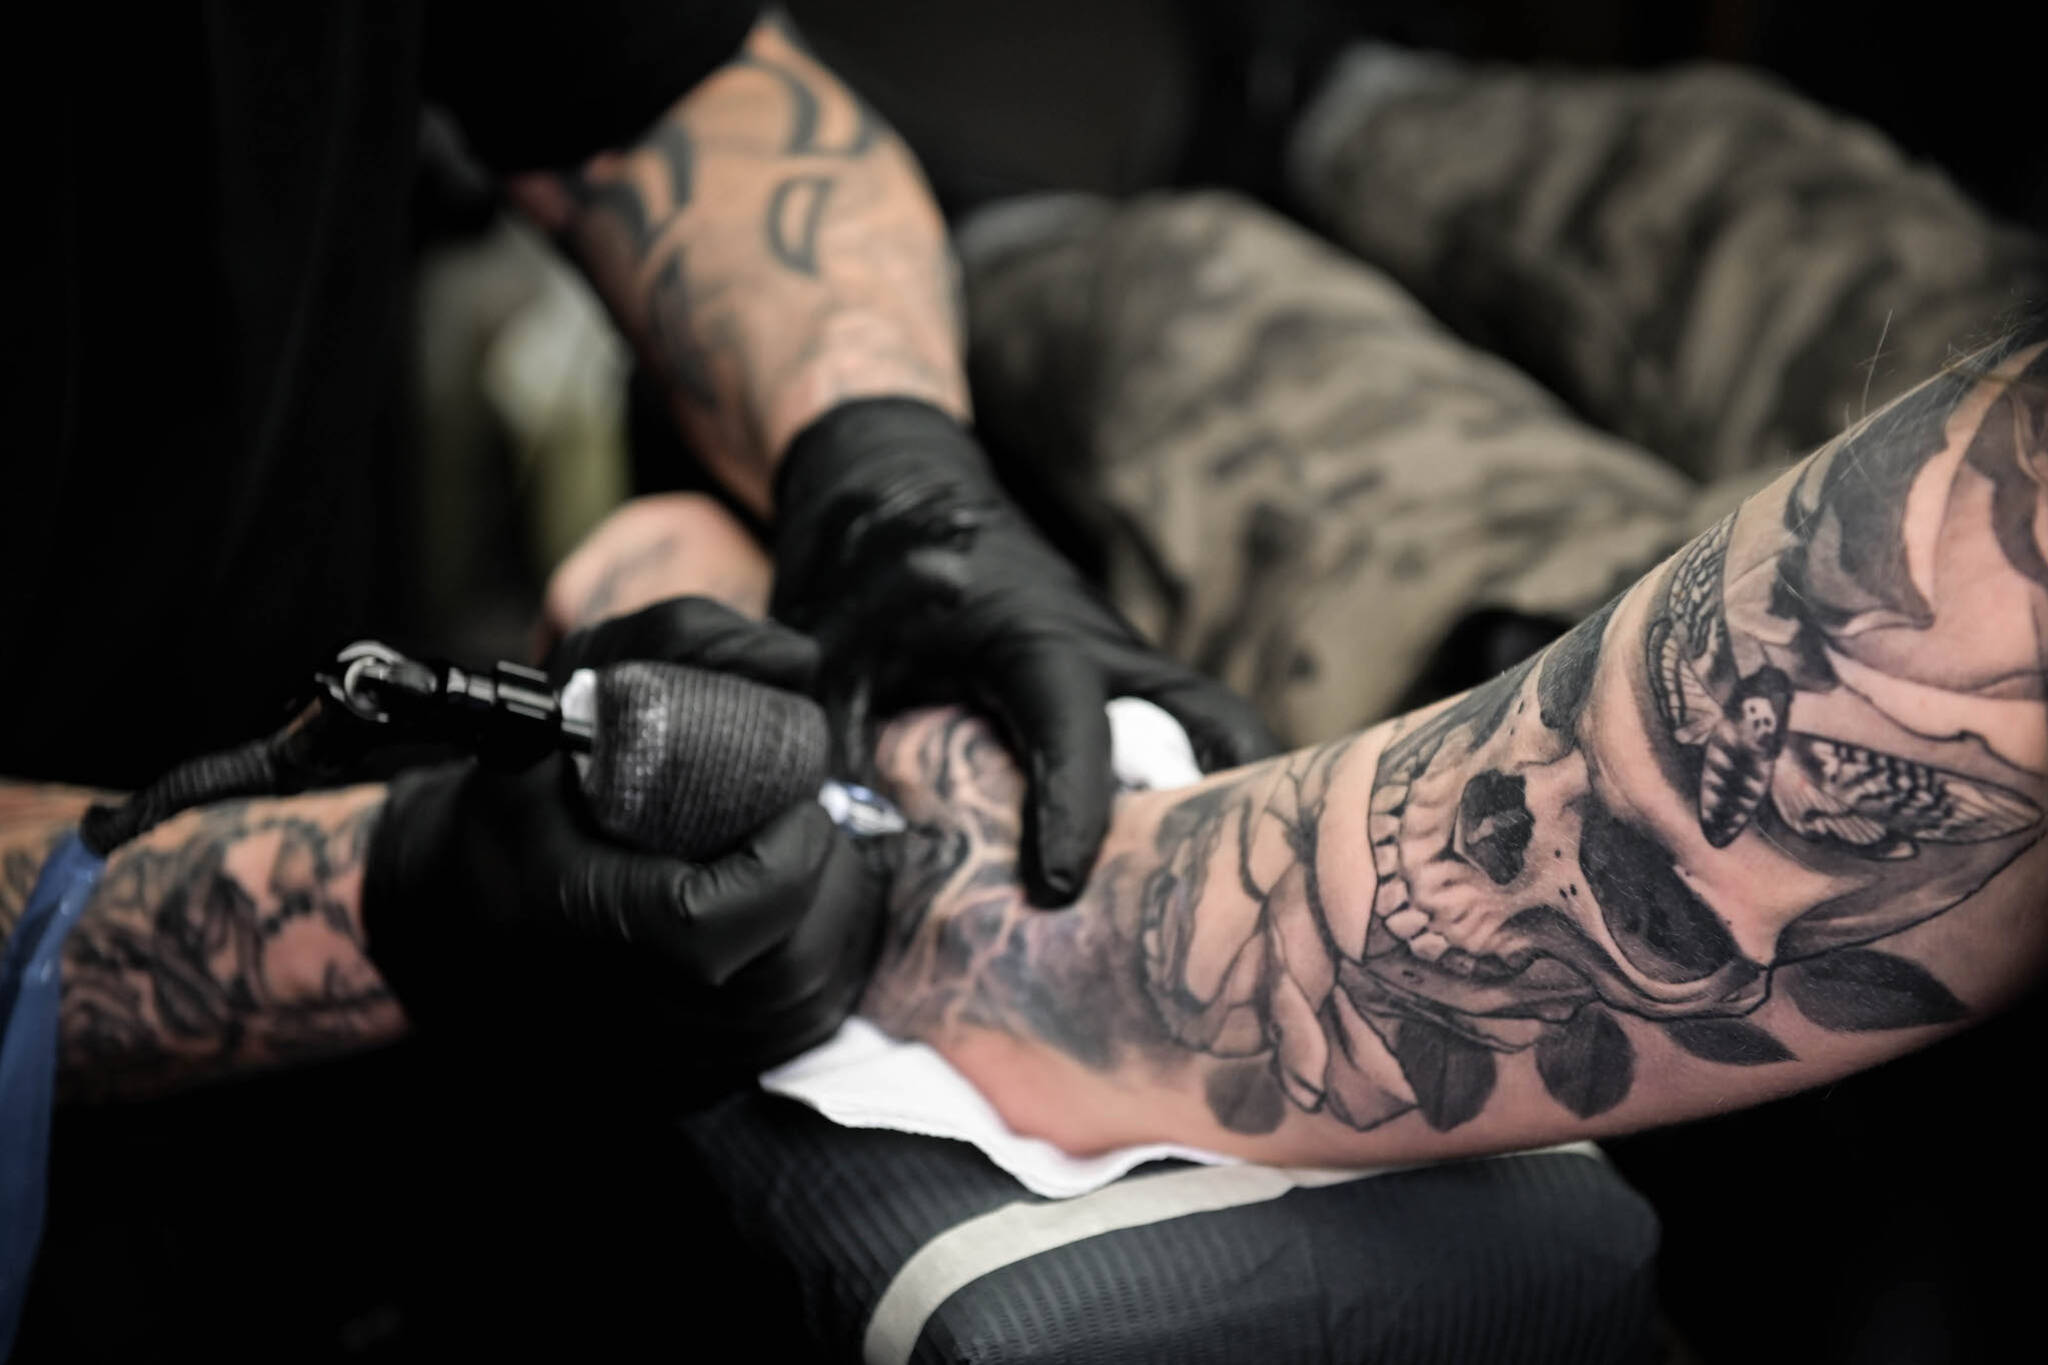 Tattoo shops in Toronto say they should be allowed to open